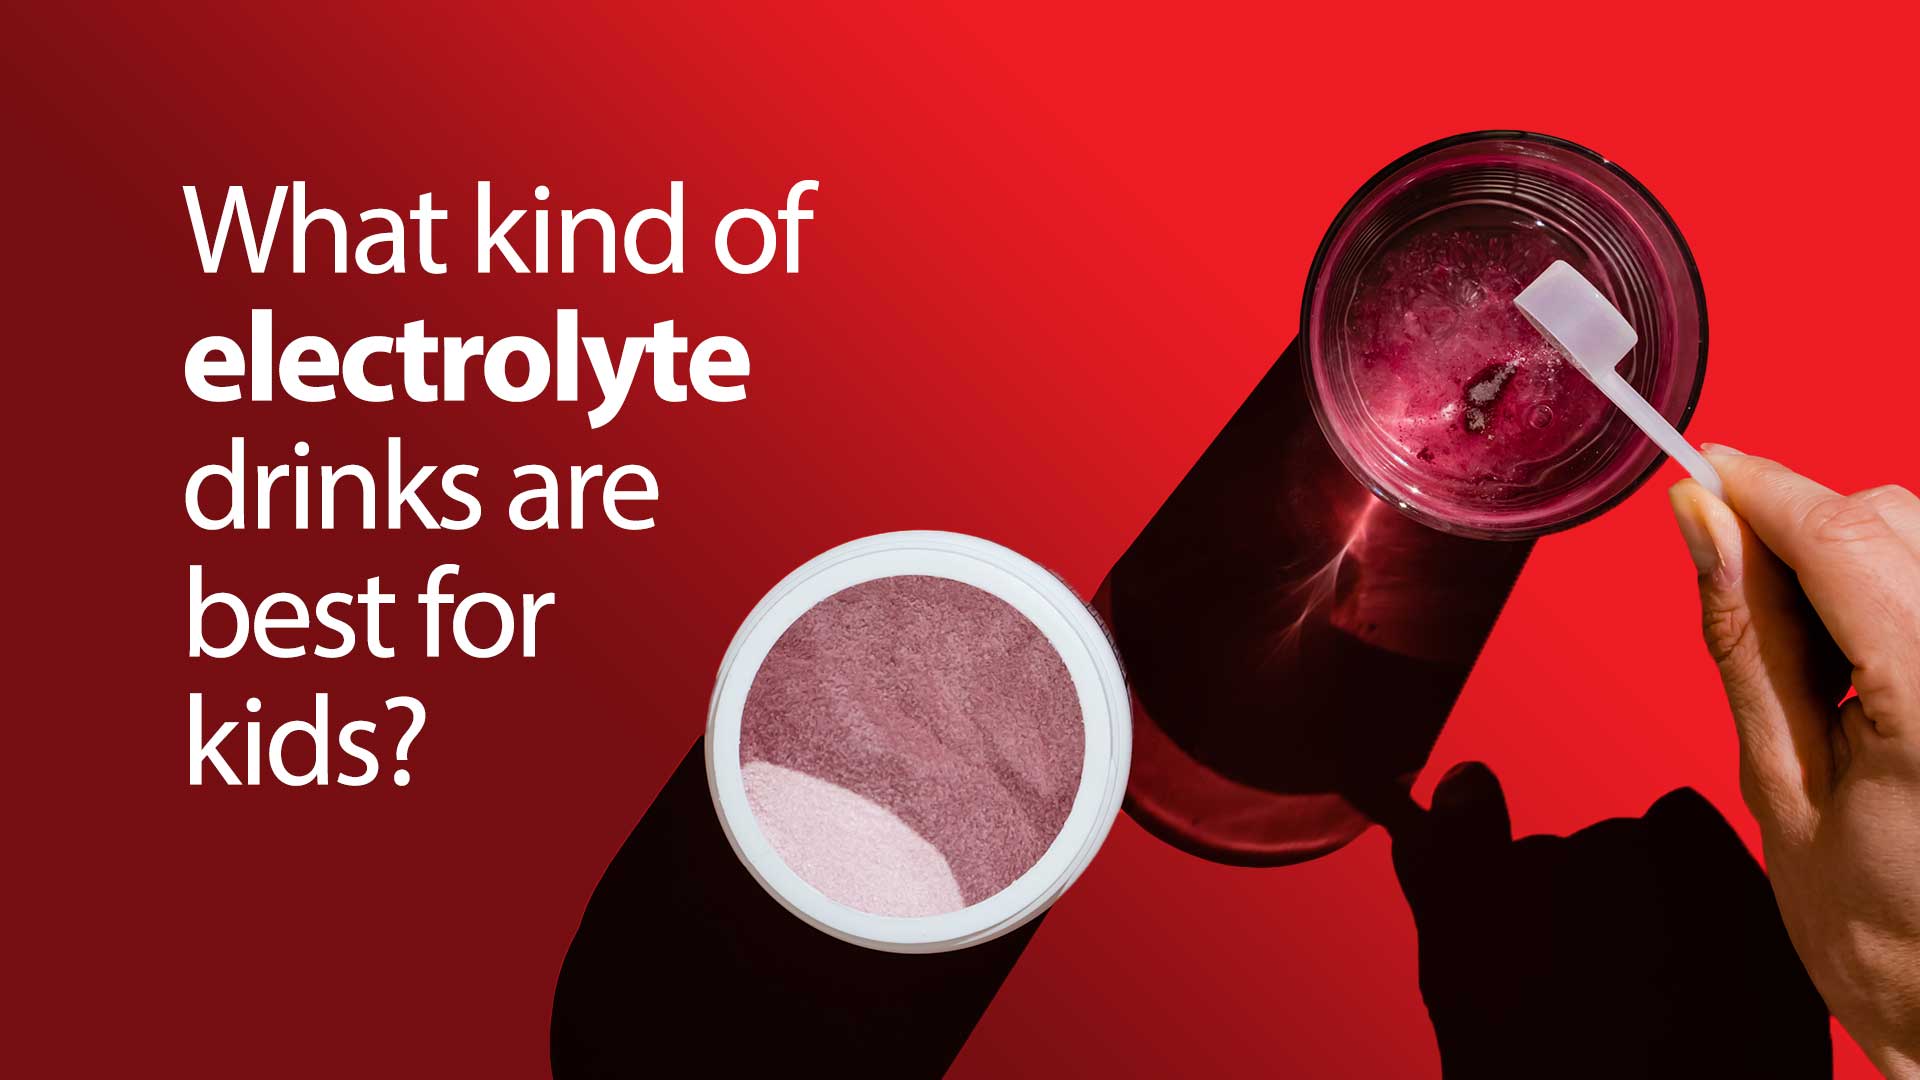 What kind of electrolytes are best for kids?